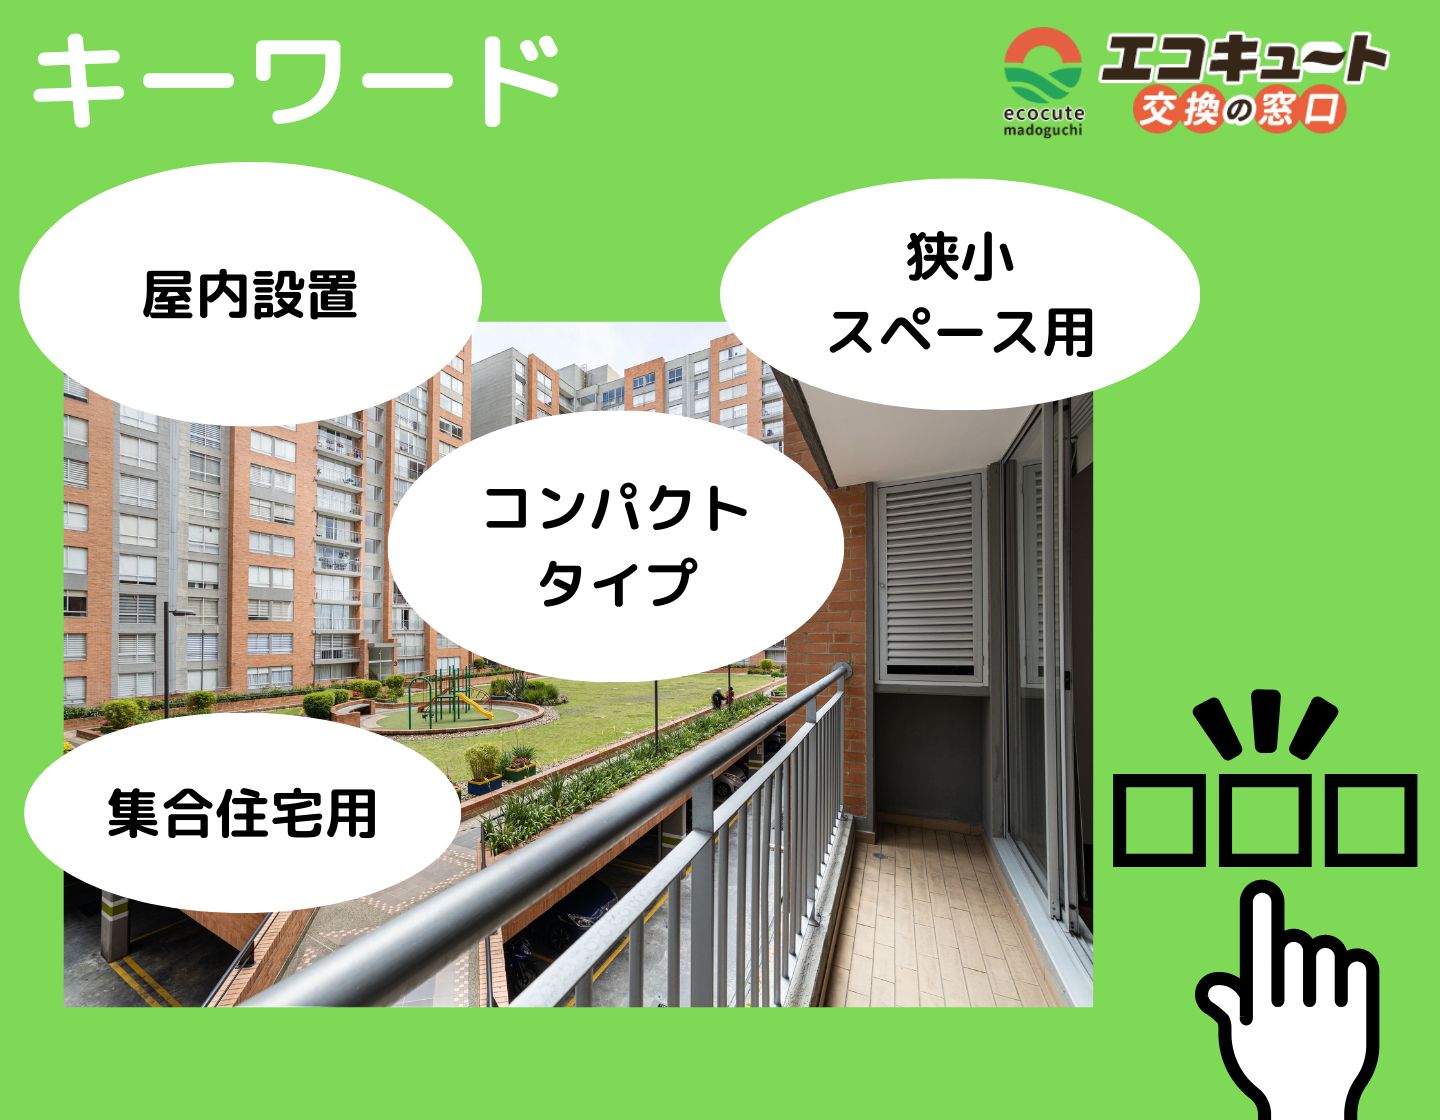 ecocute-exchange-at-apartment4